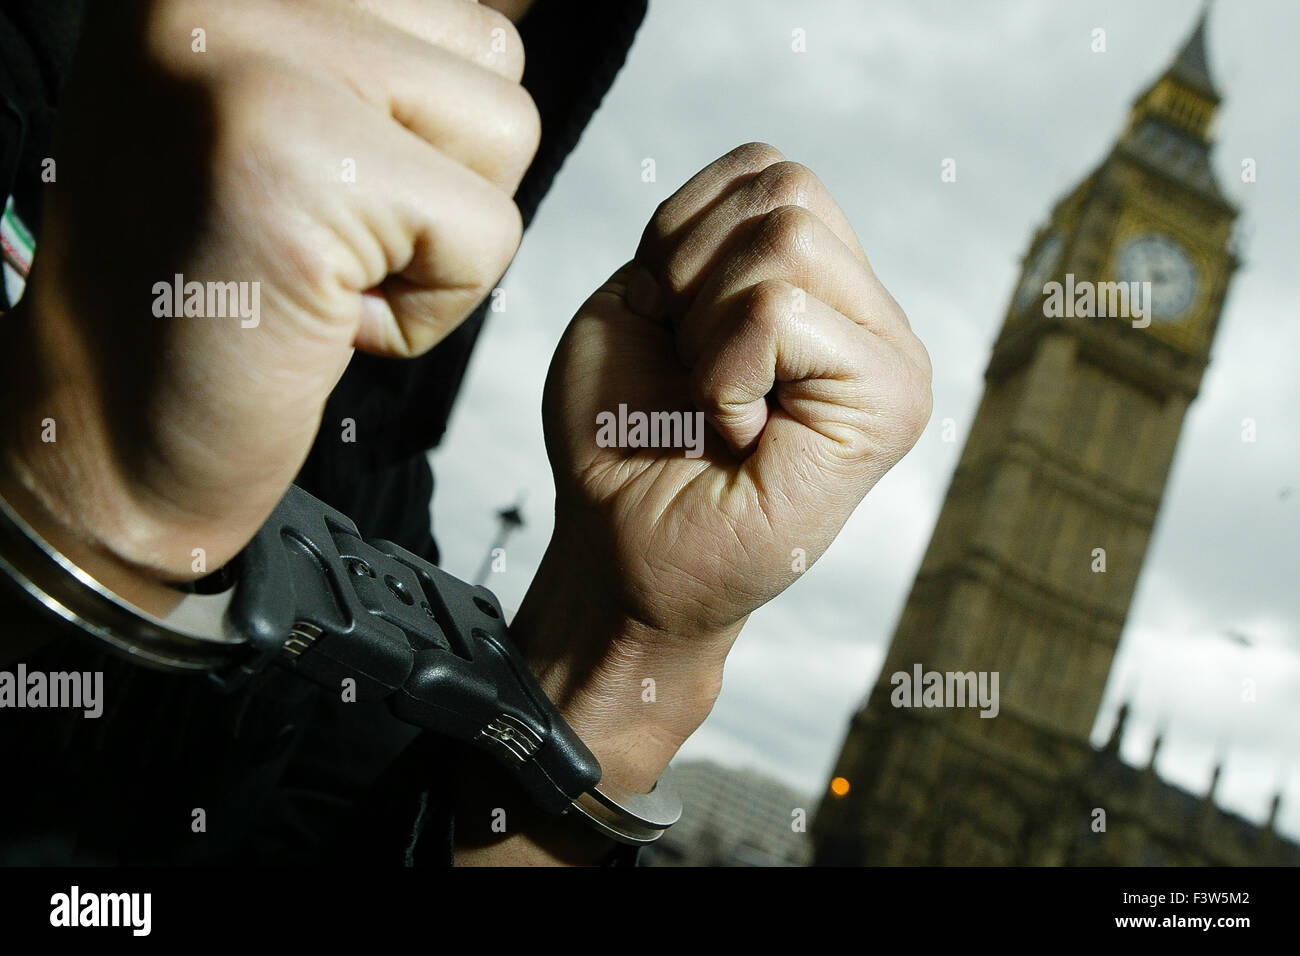 A man poses in front of the Houses of Parliament while wearing police handcuffs. Stock Photo